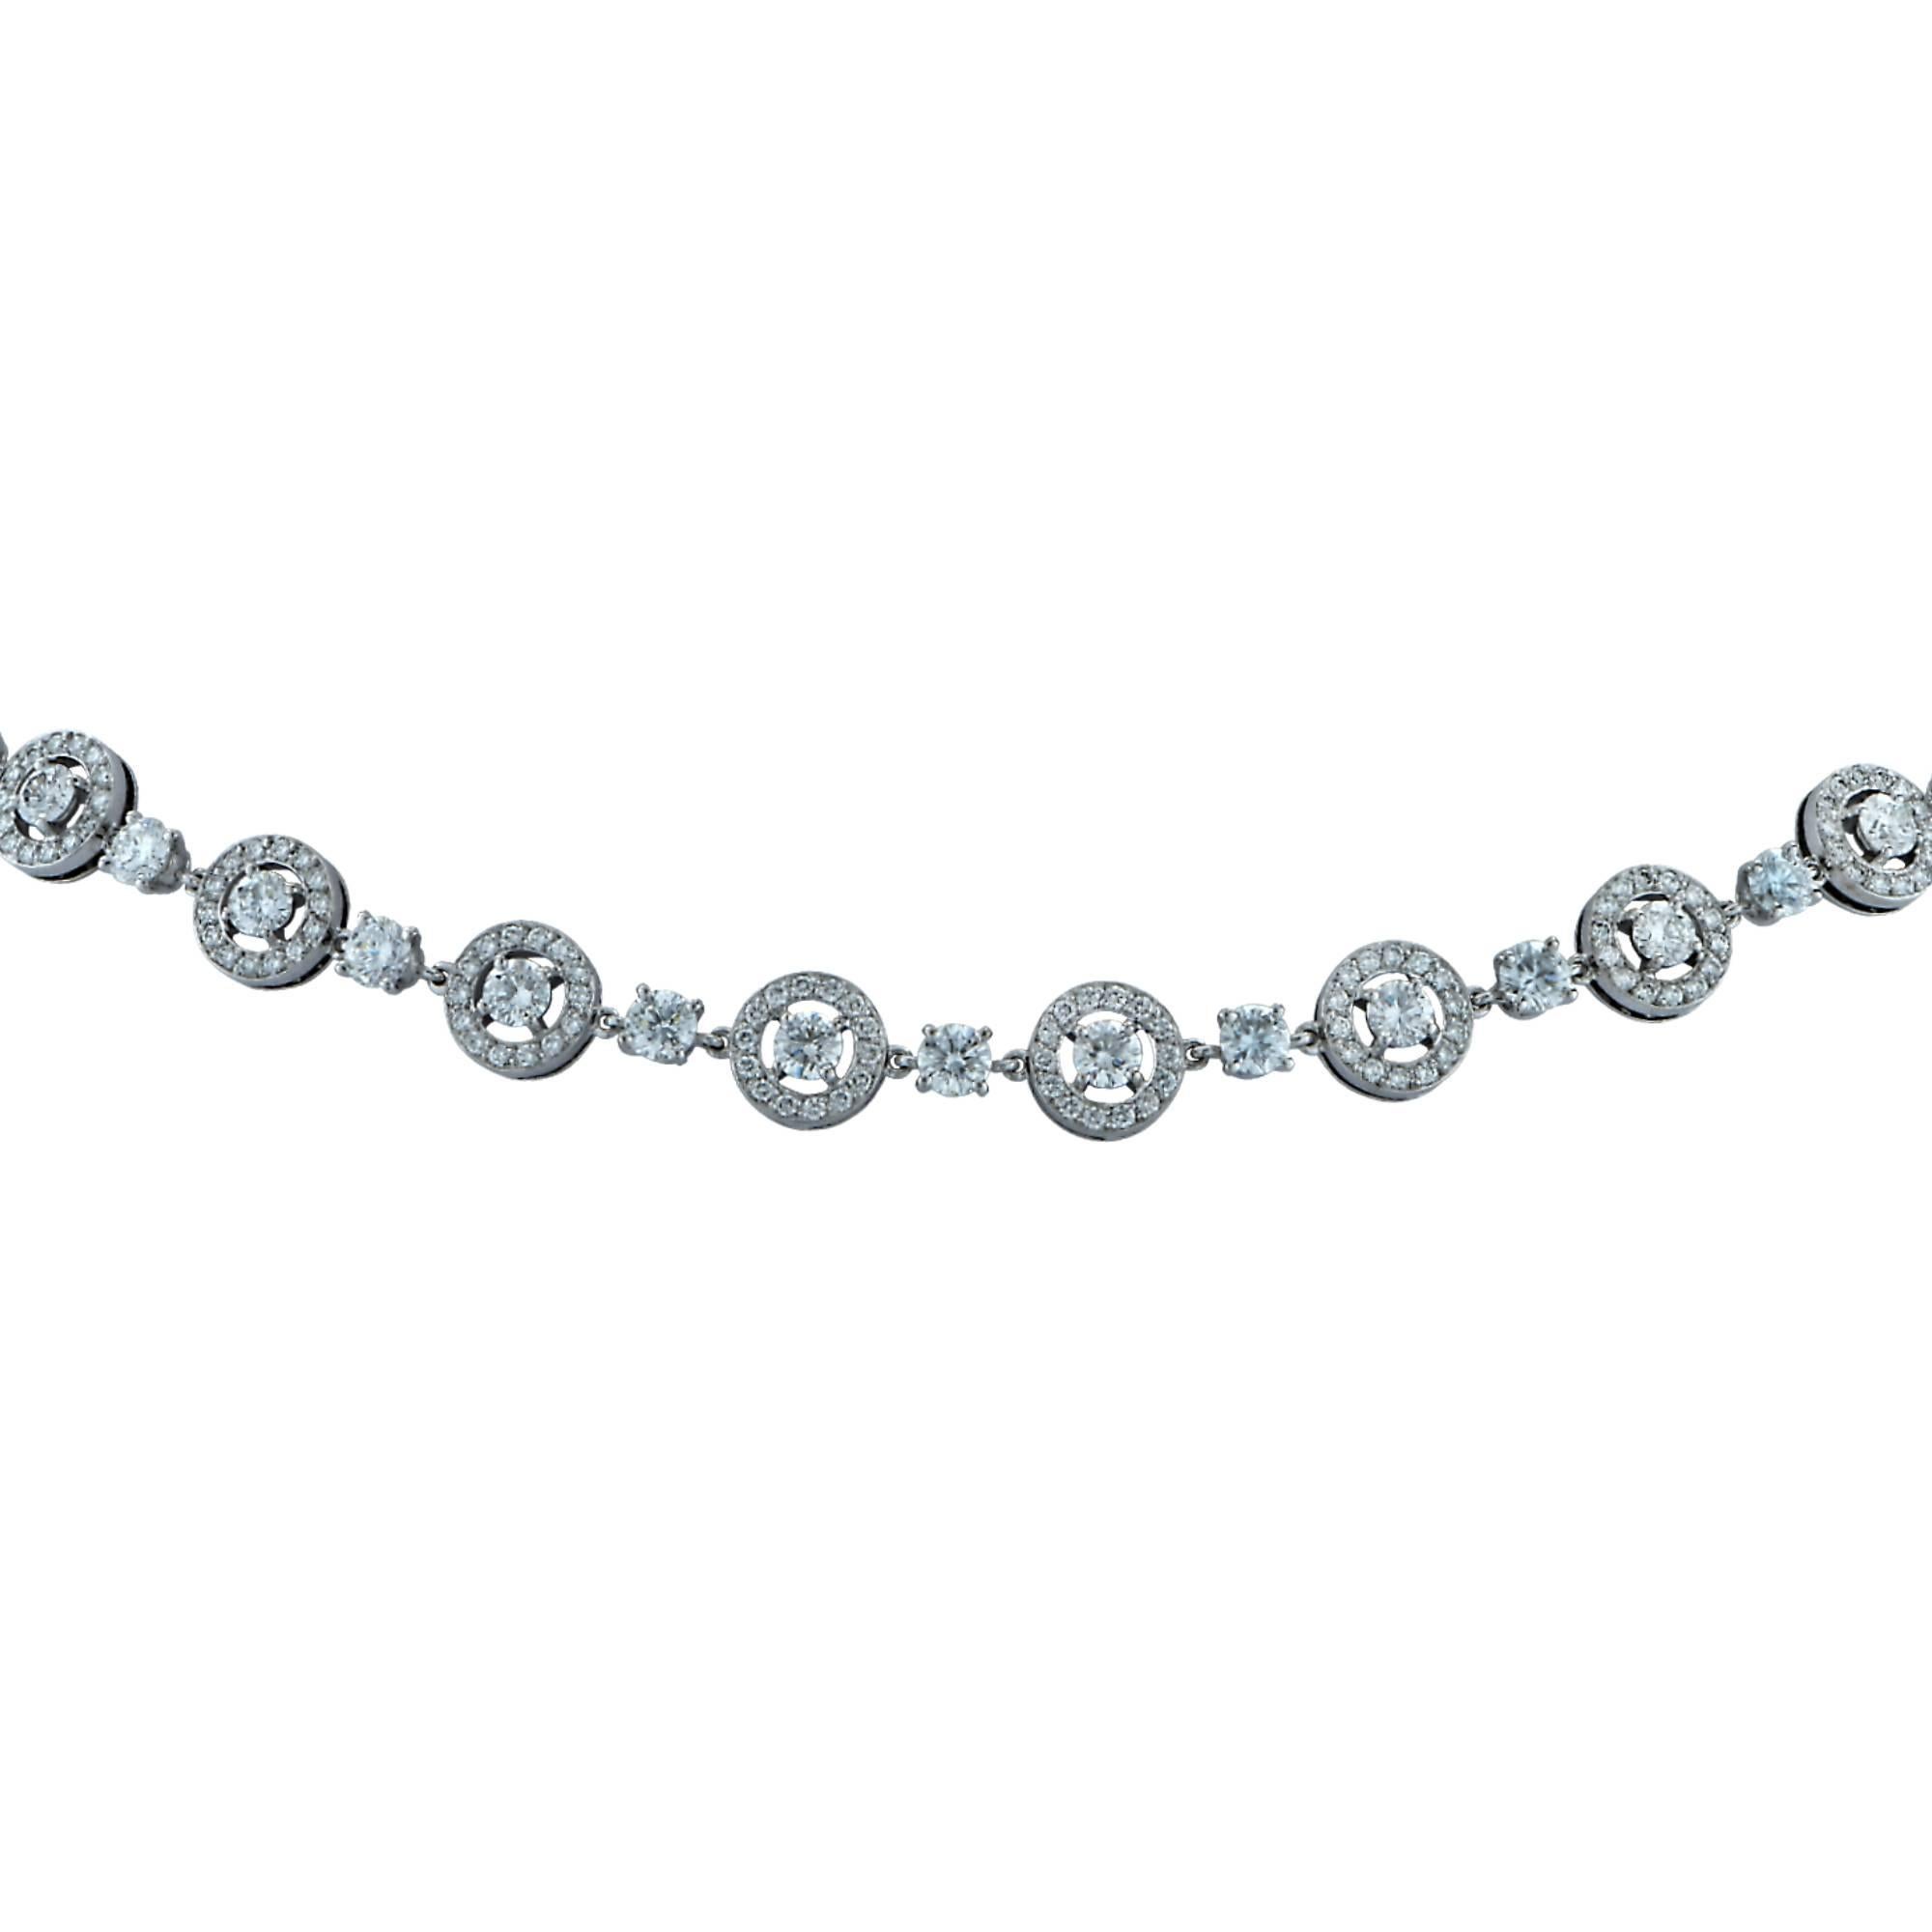 From the house of Boucheron Paris, this spectacular necklace from the Ava Collection, crafted in 18k white gold, features 431 round brilliant cut diamonds weighing approximately 12.8cts F color and VS clarity. These extremely white vibrant diamonds